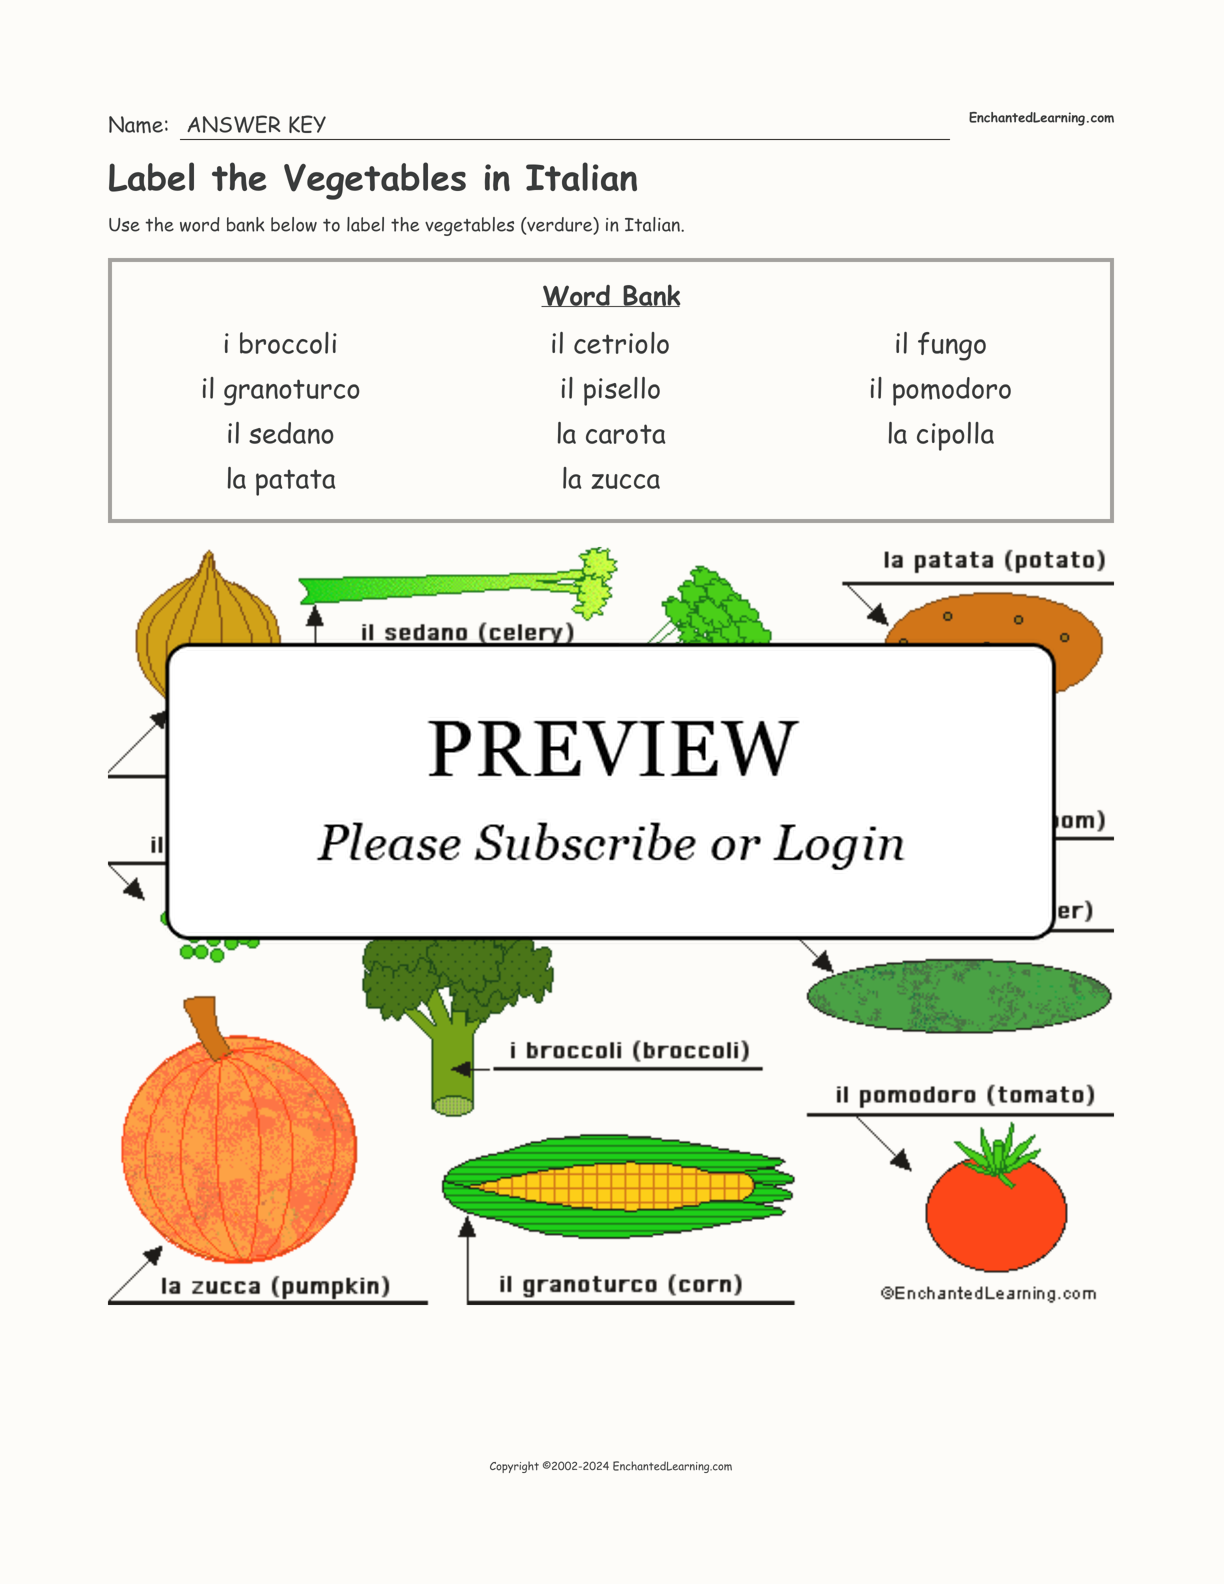 Label the Vegetables in Italian interactive worksheet page 2